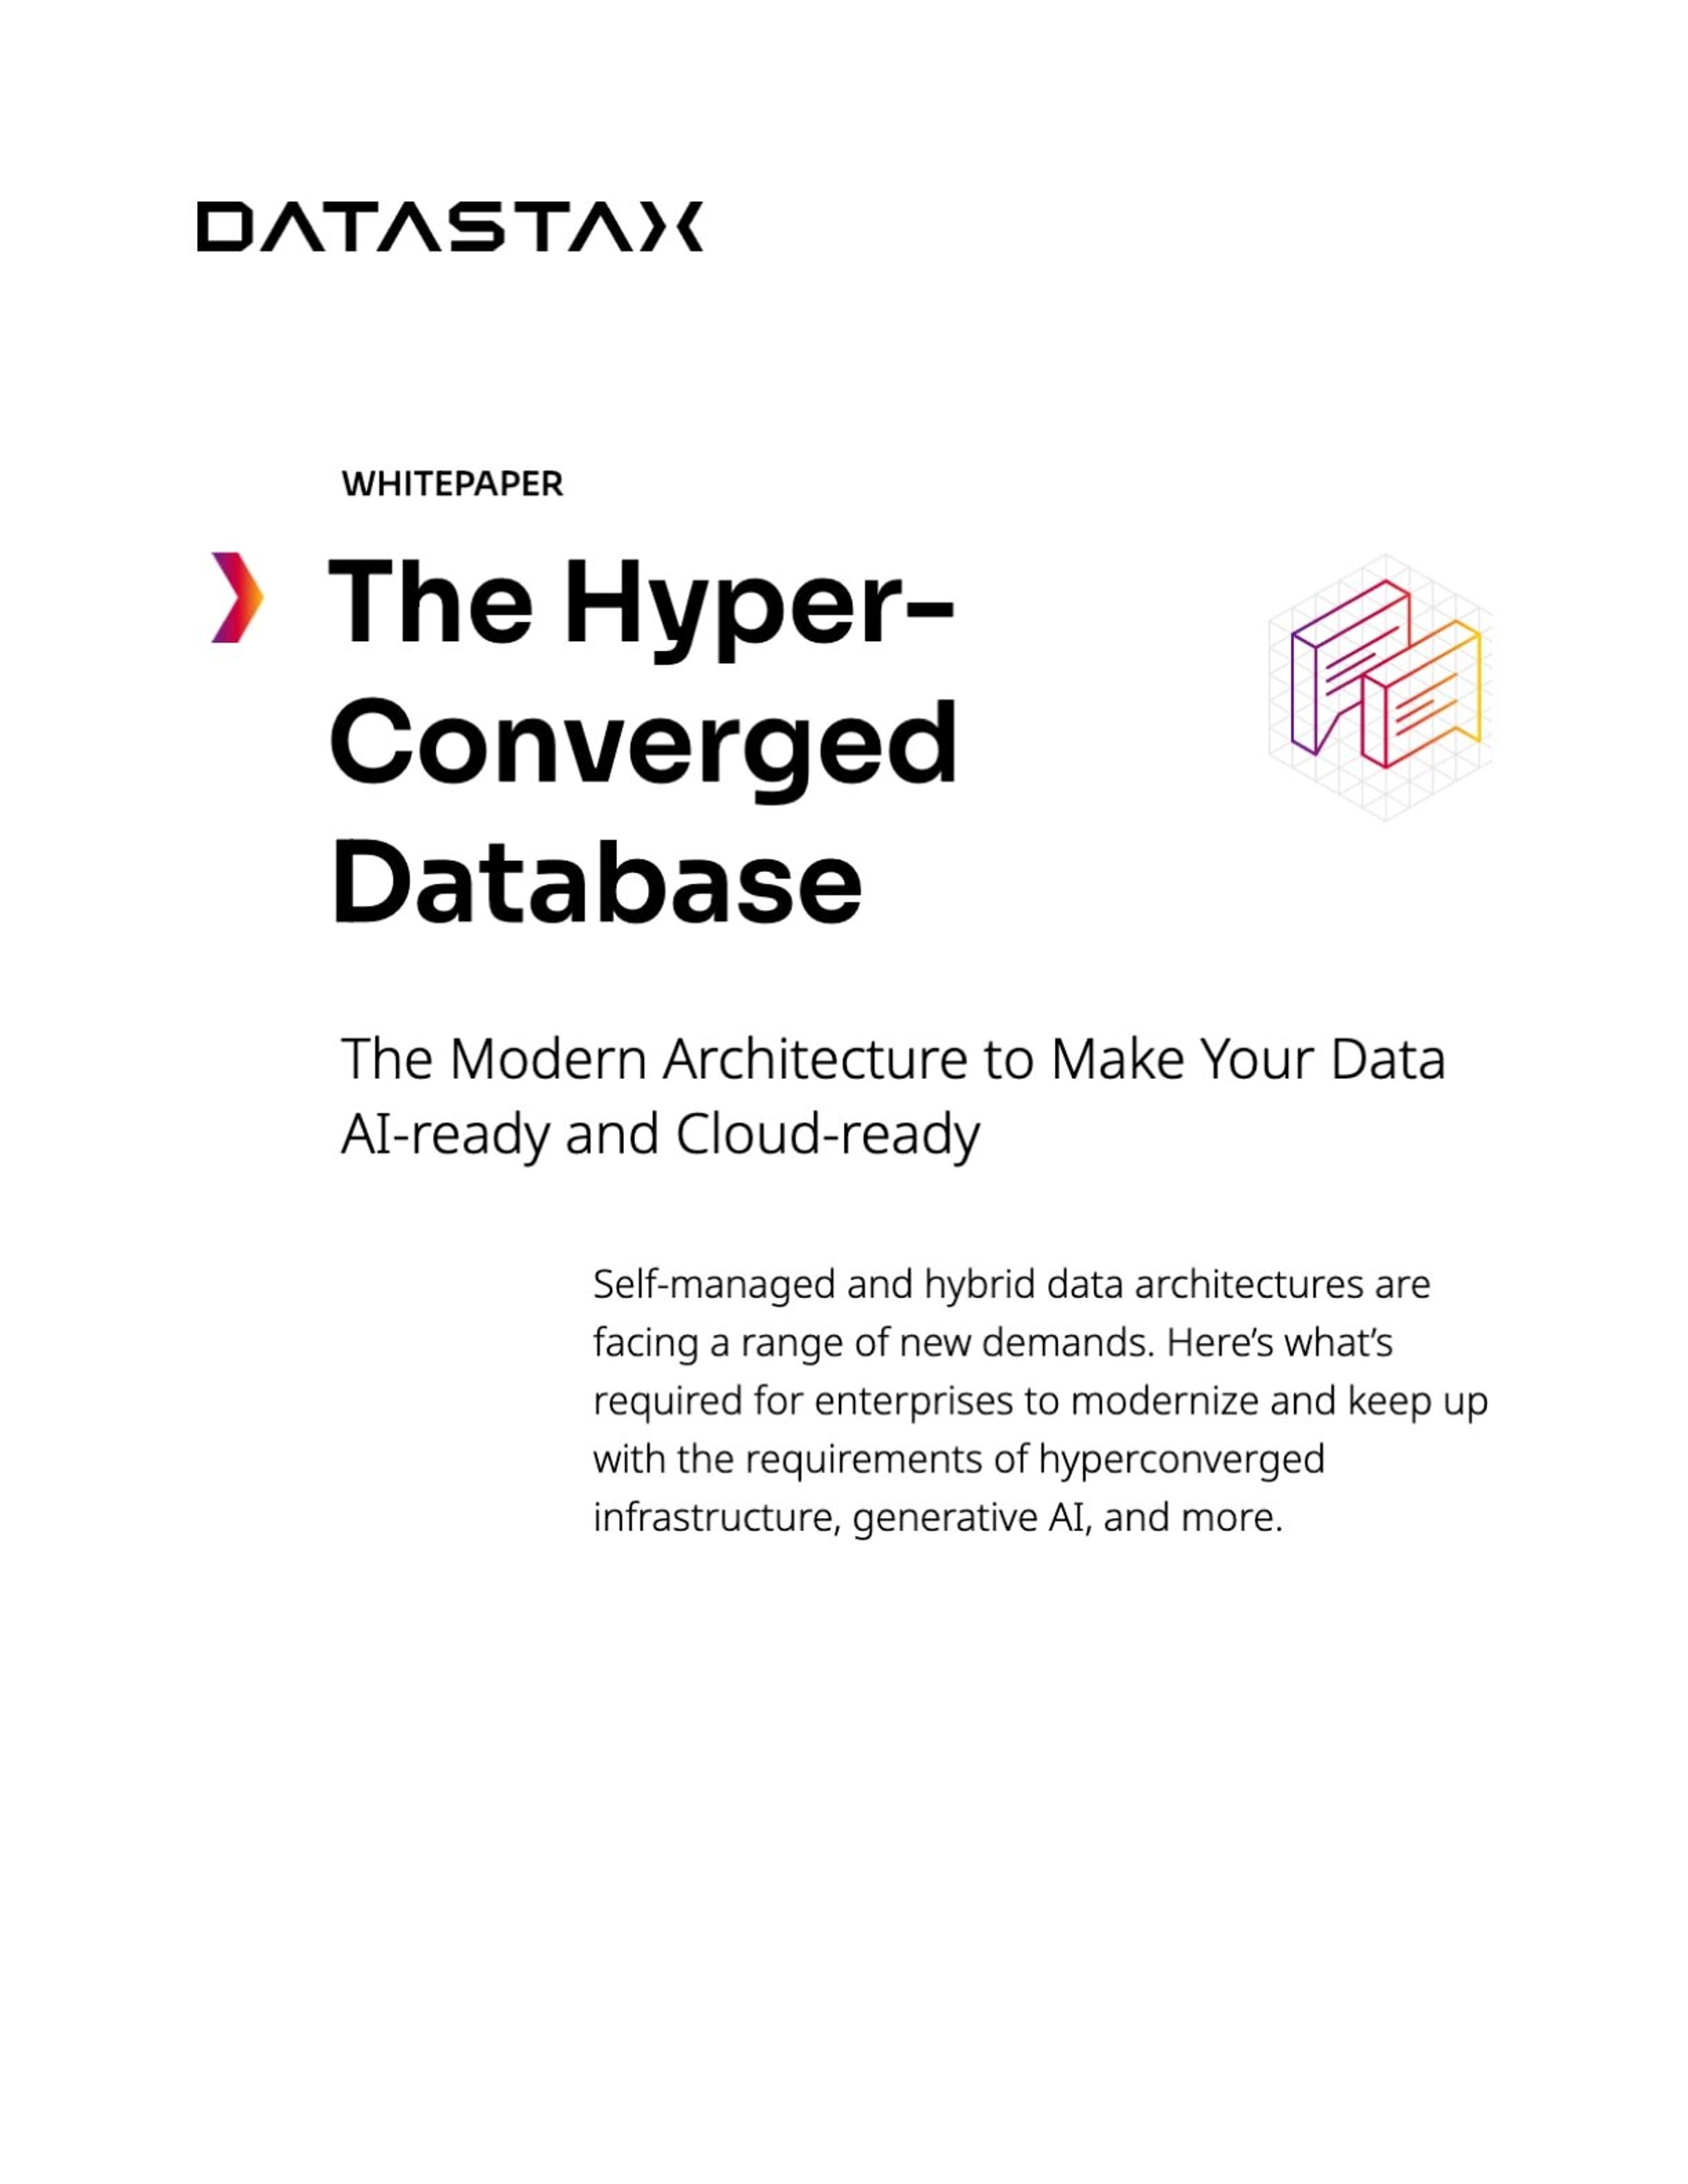 The Hyper-Converged Database to Make Your Data AI-Ready | DataStax